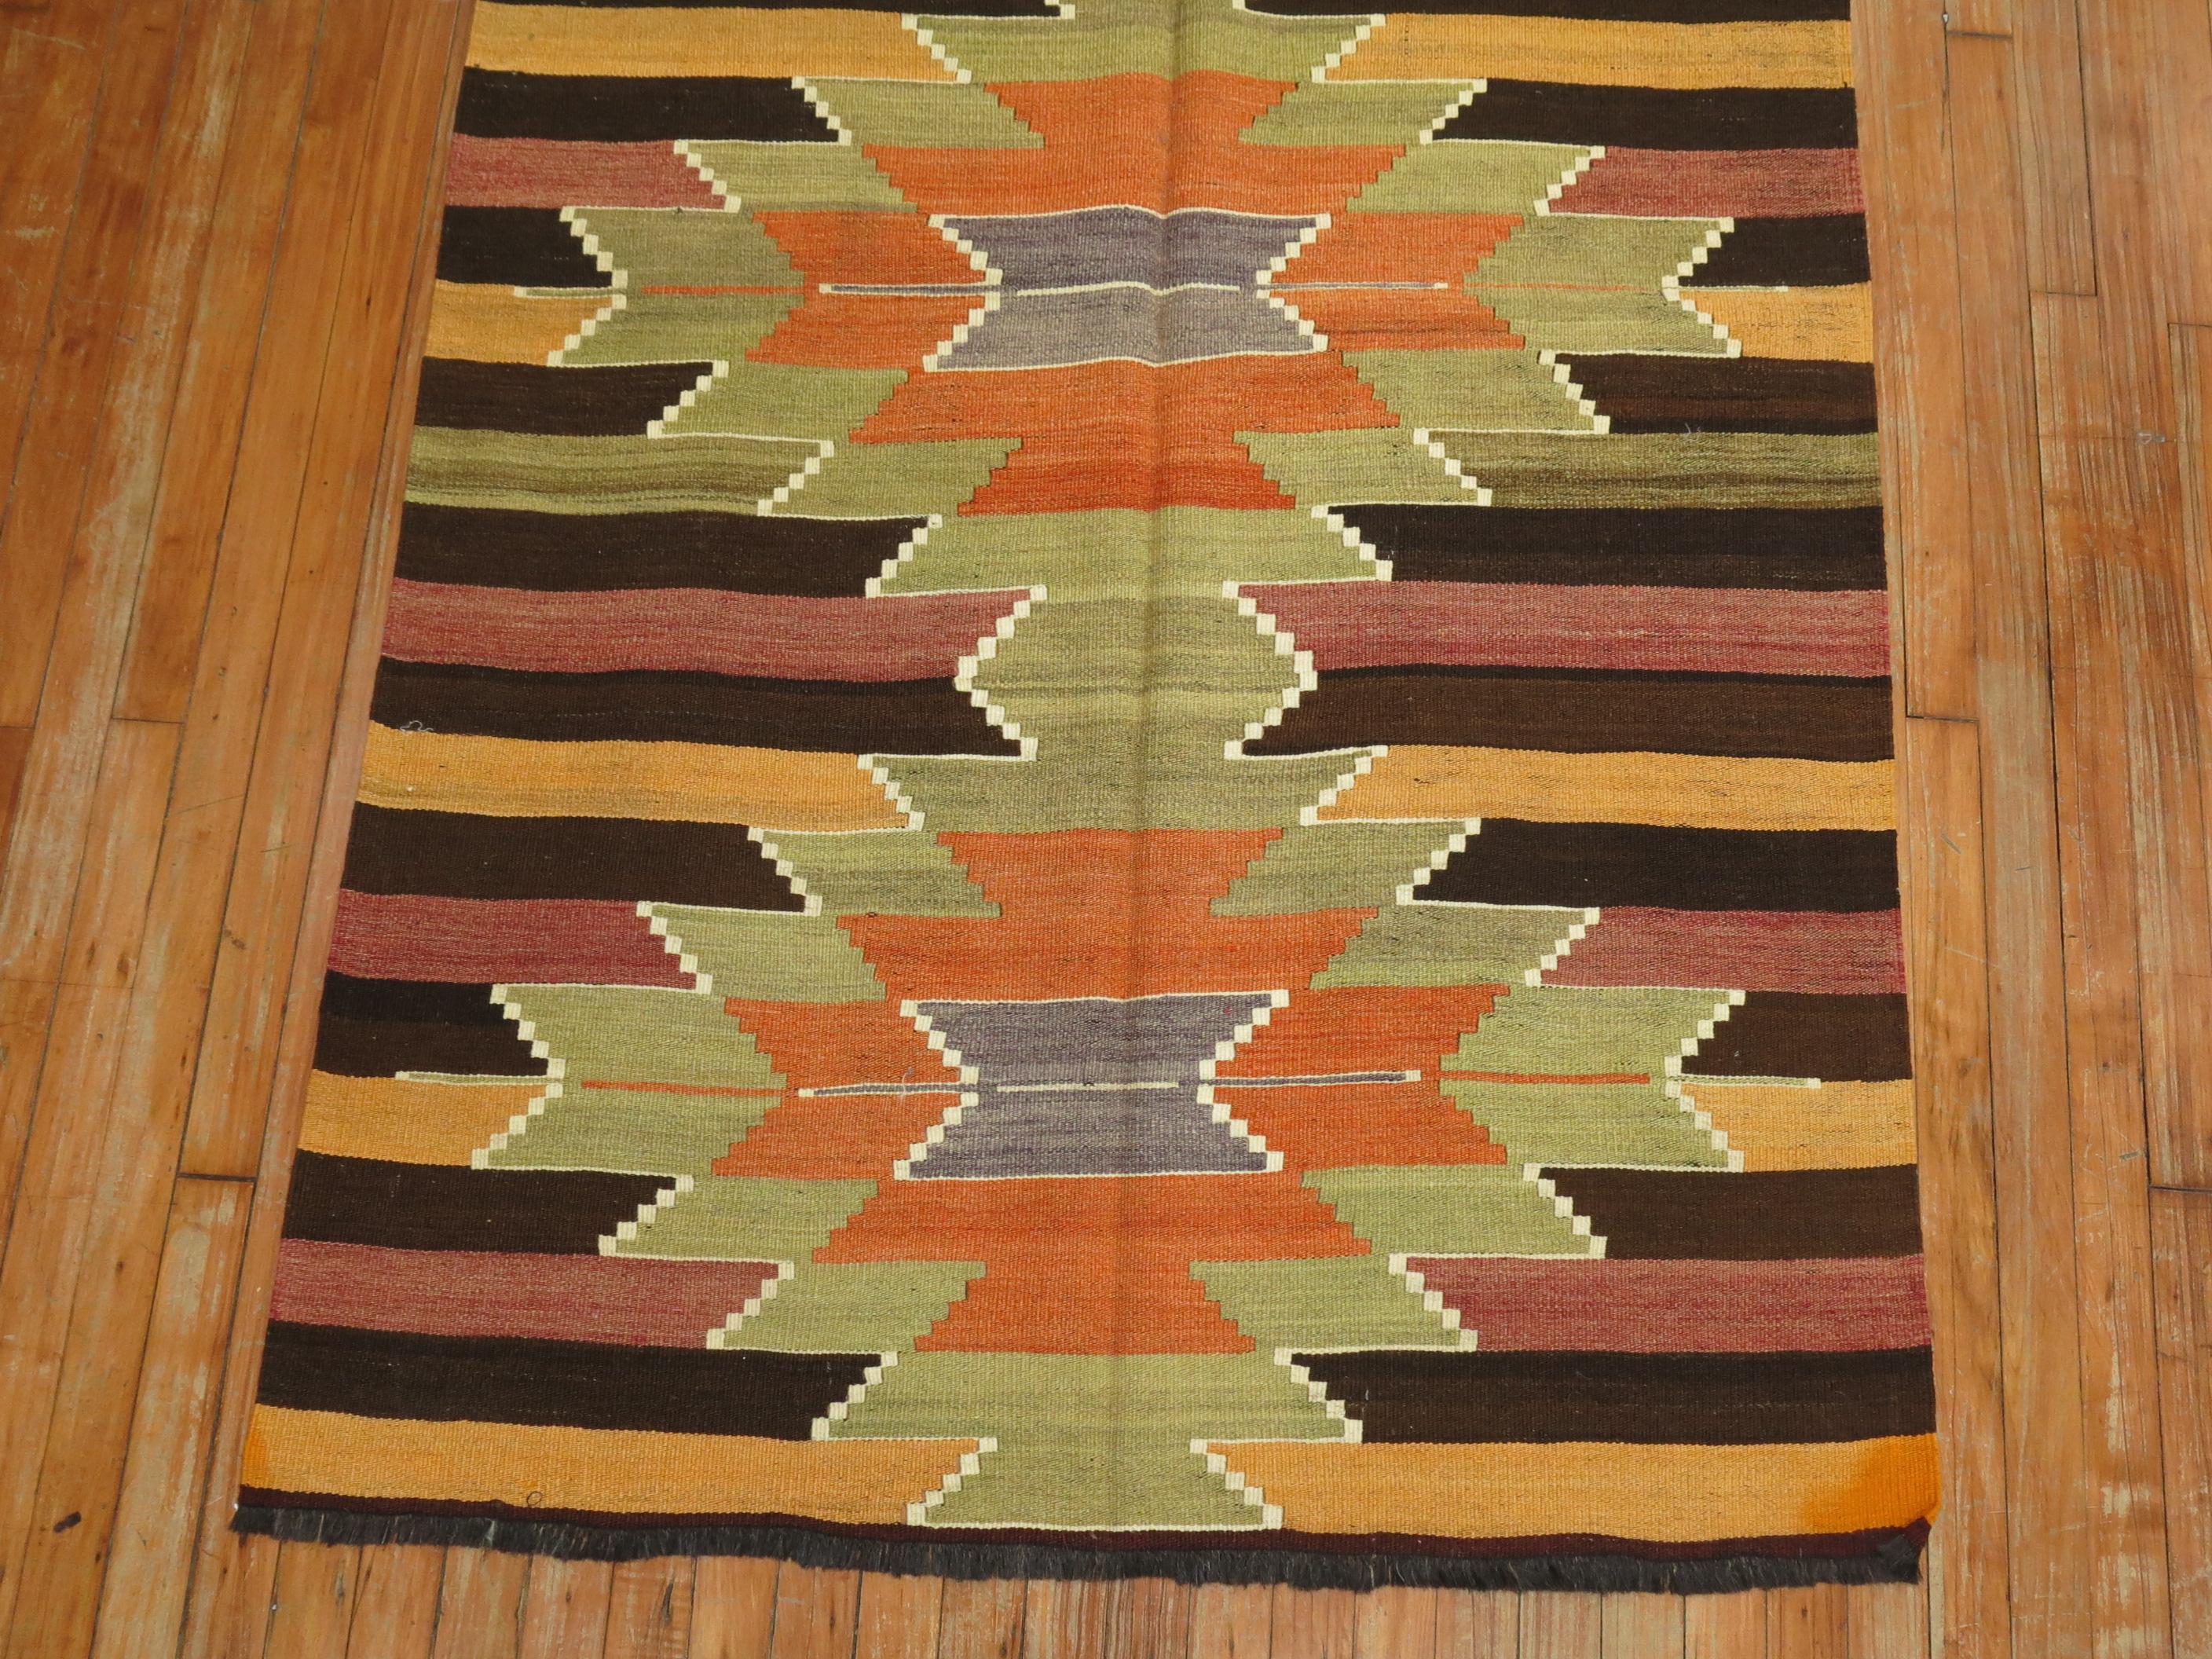 A vintage Turkish Kilim wide runner with 5 green and orange medallions on a striped ground, circa mid 20th century.
Measures: 3'10” x 10'10”.